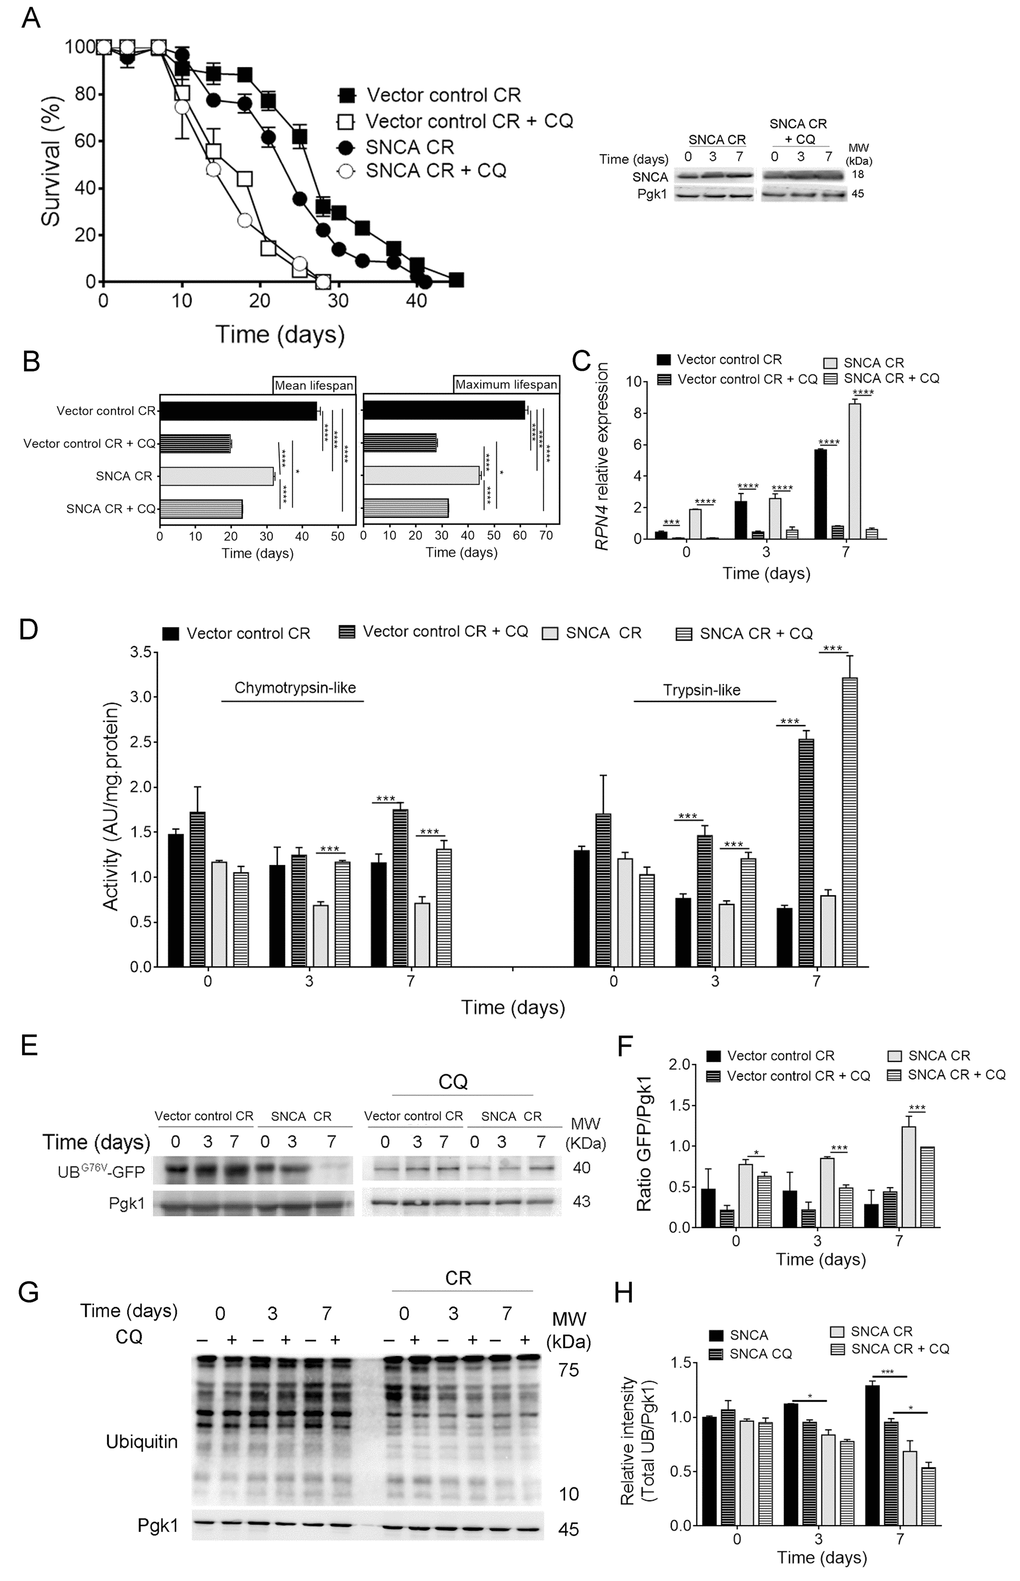 Autophagy inhibition leads to upregulation of the ubiquitin-proteasome system activity in α-synuclein (SNCA)-expressing cells under caloric restriction. (A) Chronological lifespan (CLS) and SNCA levels of SNCA-expressing stationary wild type cells, under caloric restriction (CR, 0.5% glucose) conditions, in the presence or absence of chloroquine (CQ), an inhibitor of autophagy. (B) Mean (50% survival) and maximum (10% survival) lifespans determined from curve fitting of the survival data from CLS. Significance was determined by two-way ANOVA (*p≤0.05, ****p≤0.0001) between cells grown under CR conditions expressing vector control or SNCA in the presence or absence of CQ. (C) RPN4 mRNA relative expression levels as described in the legend of Figure 1. (D) Chymotrypsin- and trypsin like activities. The assay was normalized to the total protein amount. (E) UPS activity measured by monitoring the ubiquitin/proteasome-dependent proteolysis of the short-lived protein UBG76V-GFP. GFP was detected by Western blotting using a GFP-specific antibody. (F) Graphical representation of GFP/Pgk1 obtained by densitometric analysis. (G) Ubiquitination profile determined by Western blotting using an anti-mono and polyubiquitination antibody. (H) Graphical representation of the intensity of total UB/Pgk1 obtained by densitometric analysis. Statistical significance represented in (C), (D), (F) and (H) was determined by Student's t-test (*p≤0.05, ***p≤0.001, ****p≤0.0001) comparing caloric restricted vector control or SNCA-expressing cells in the presence or absence of CQ. Data represents mean ± SEM of at least three biological independent replicas. The error bars represent the standard error of the mean (SEM).